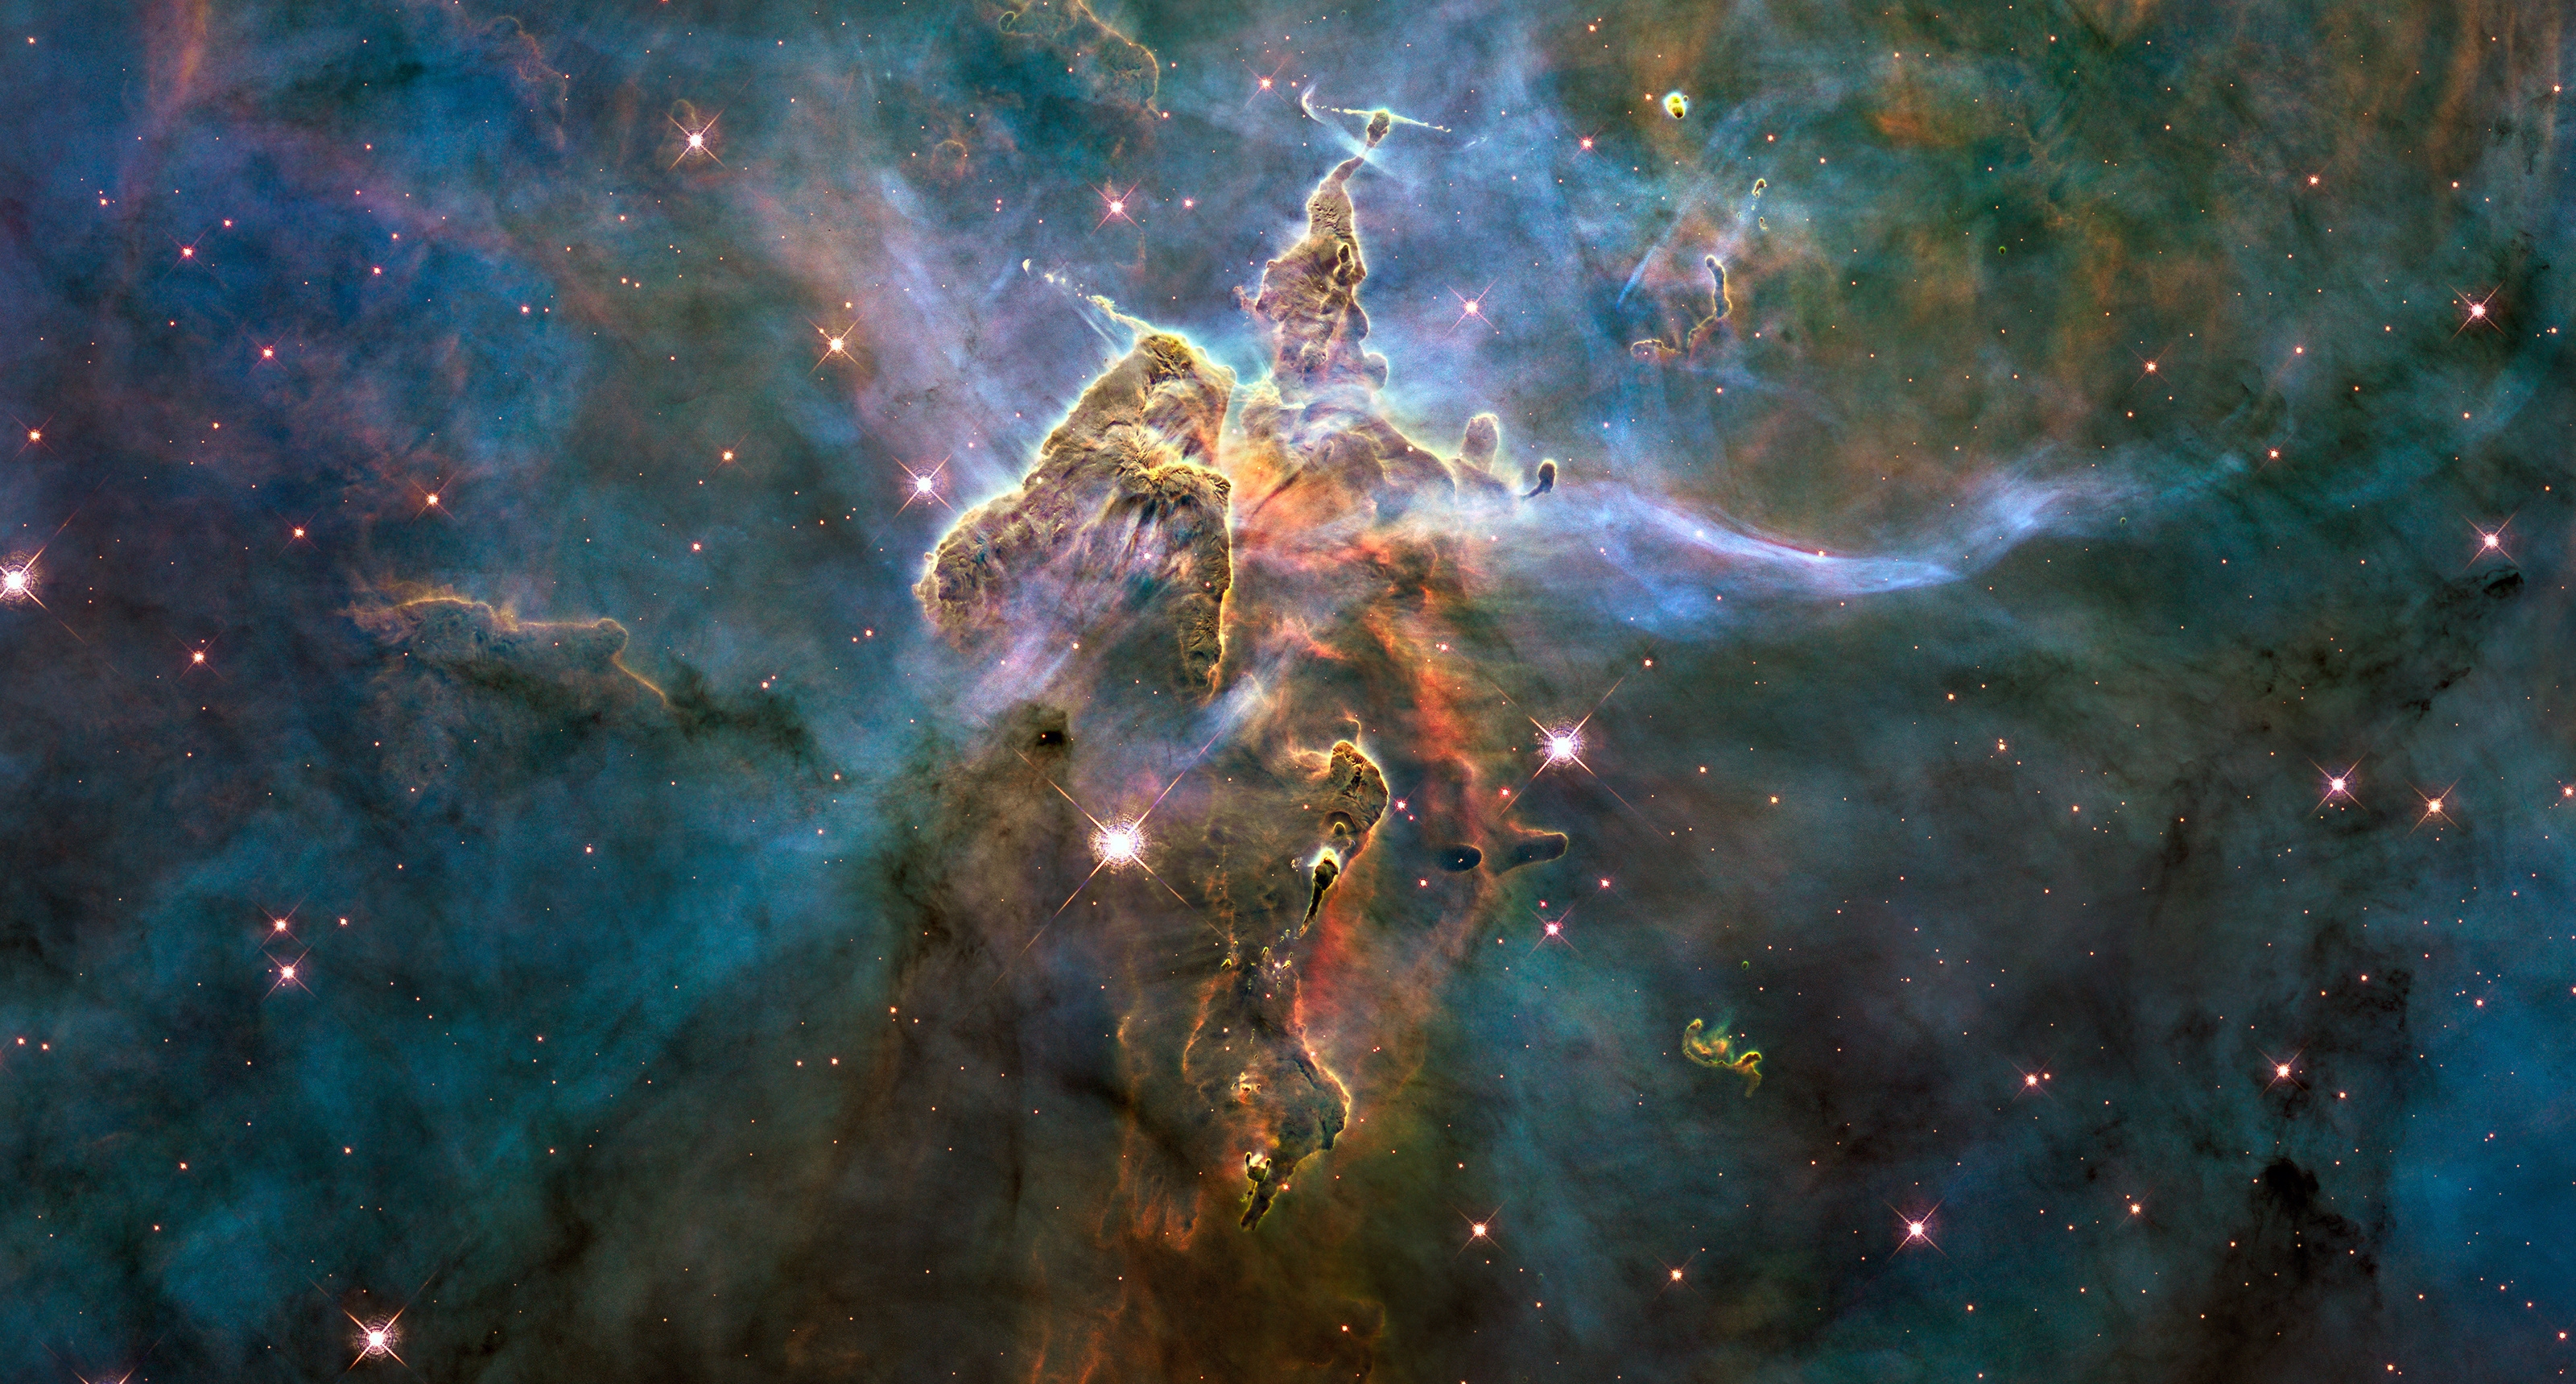 2013-09-21-Picture_by_Hubble_Space_Telescope_crop.jpg